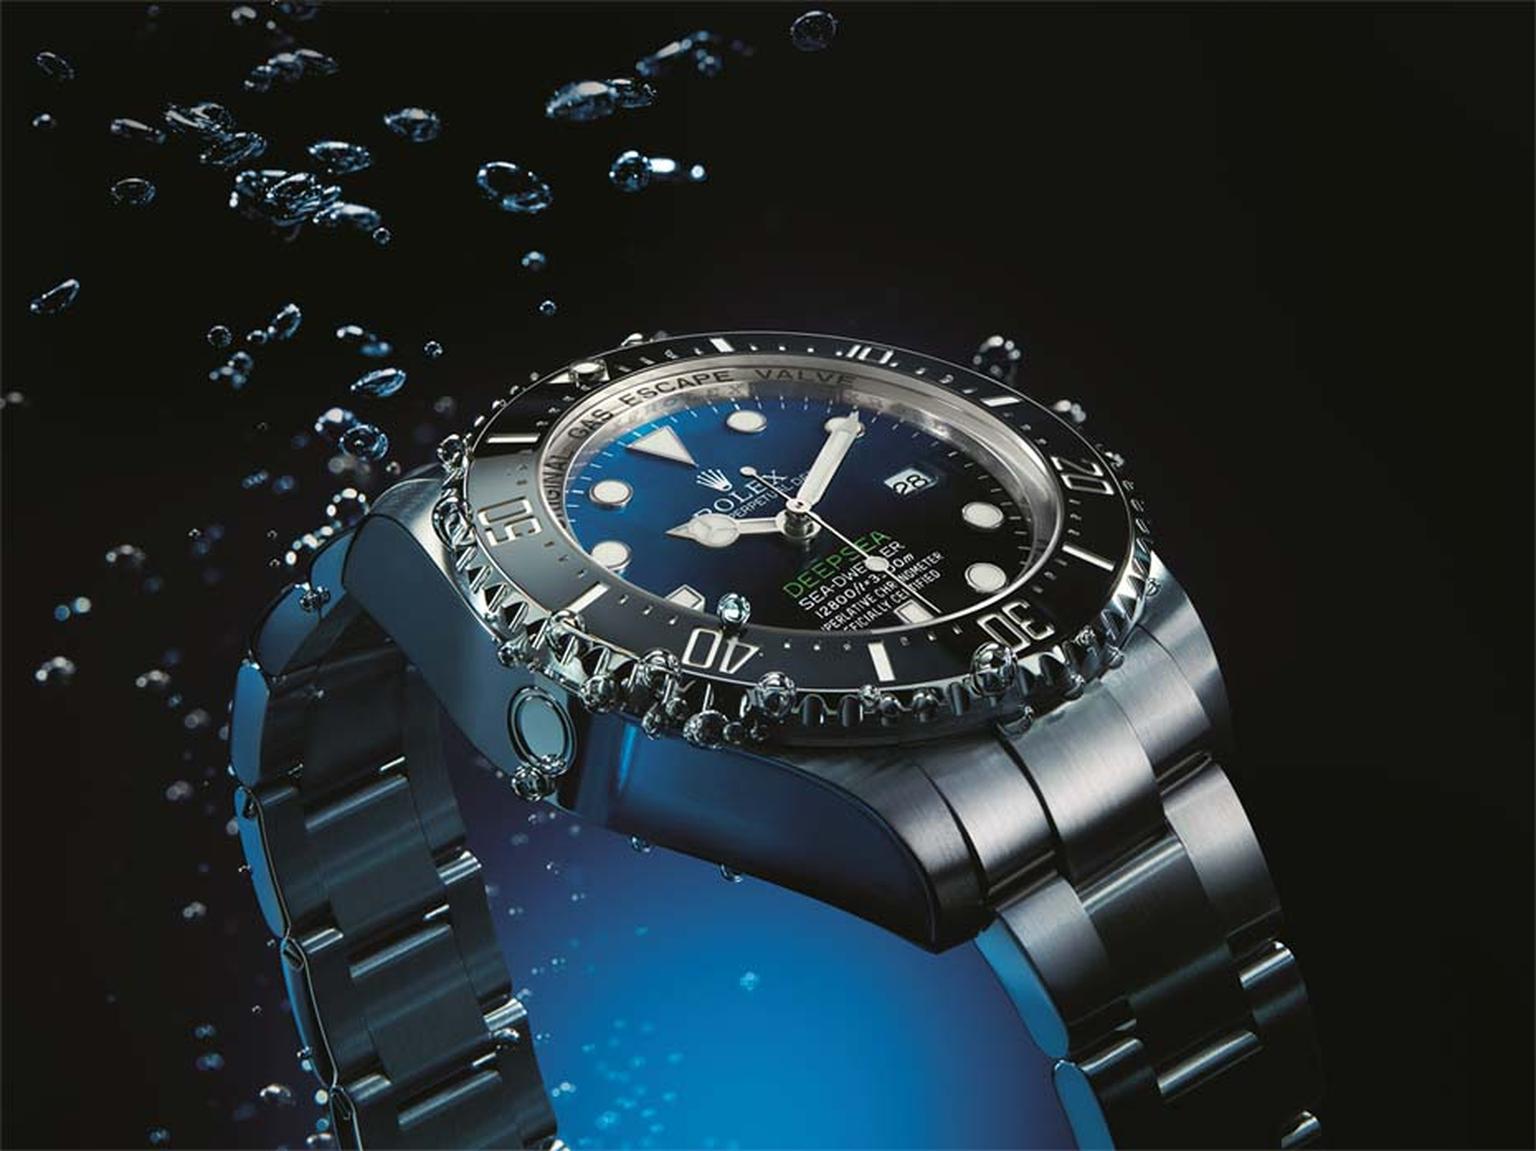 The Rolex 44mm Deepsea Sea-Dweller watch, watertight up to 4,000m, features a lightweight titanium case and a D-Blue dial to represent the changing colours of the sea.